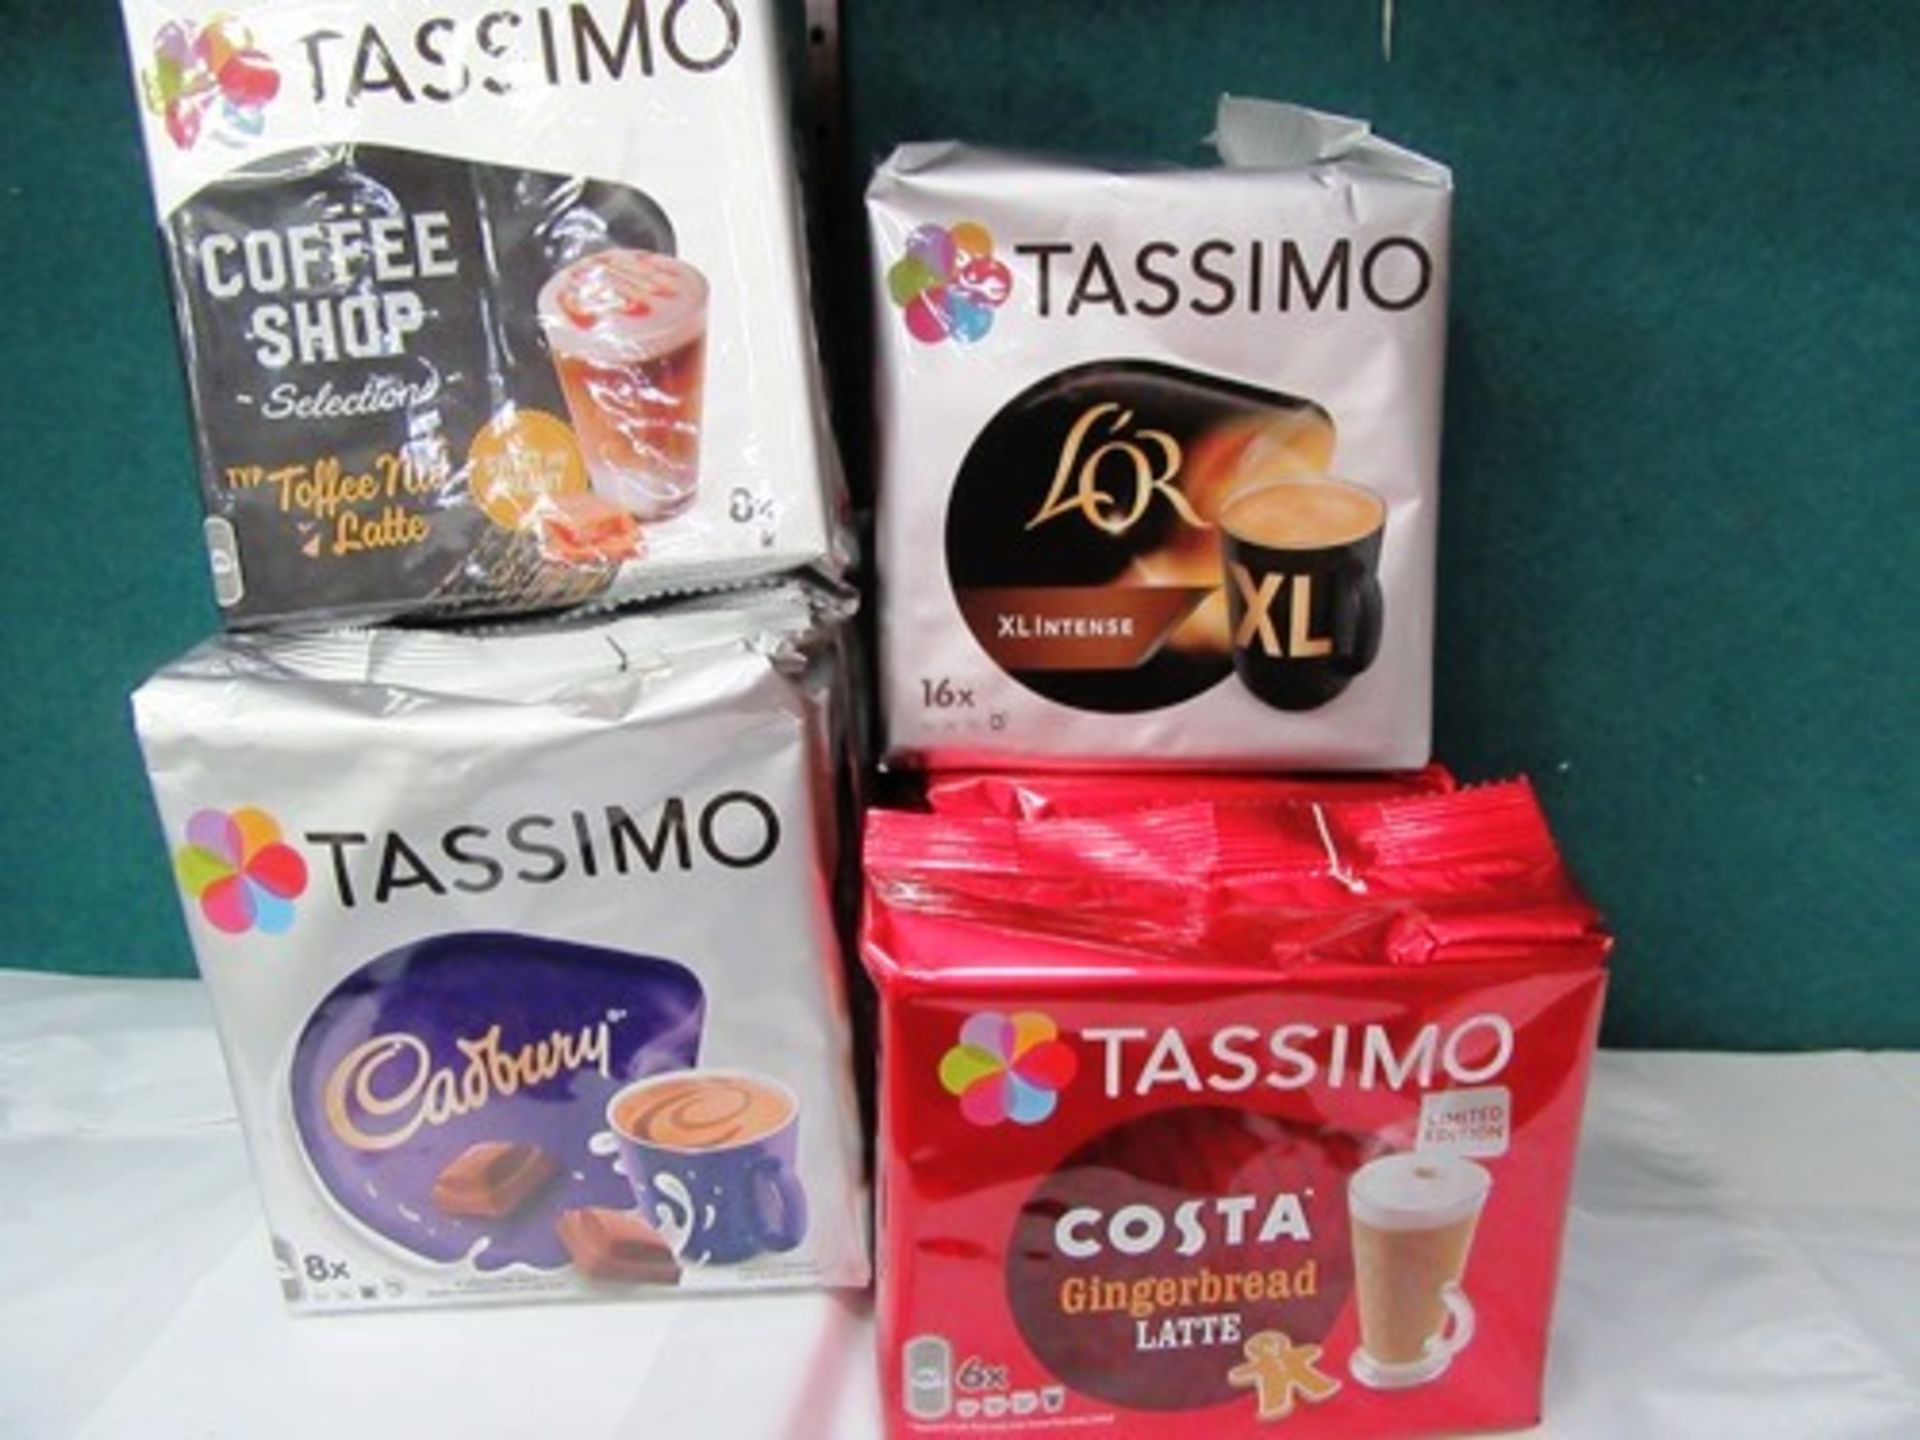 6 x boxes each containing 5 x 223.2g Tassimo products, to include L'or latte Macchiato, Creamer,